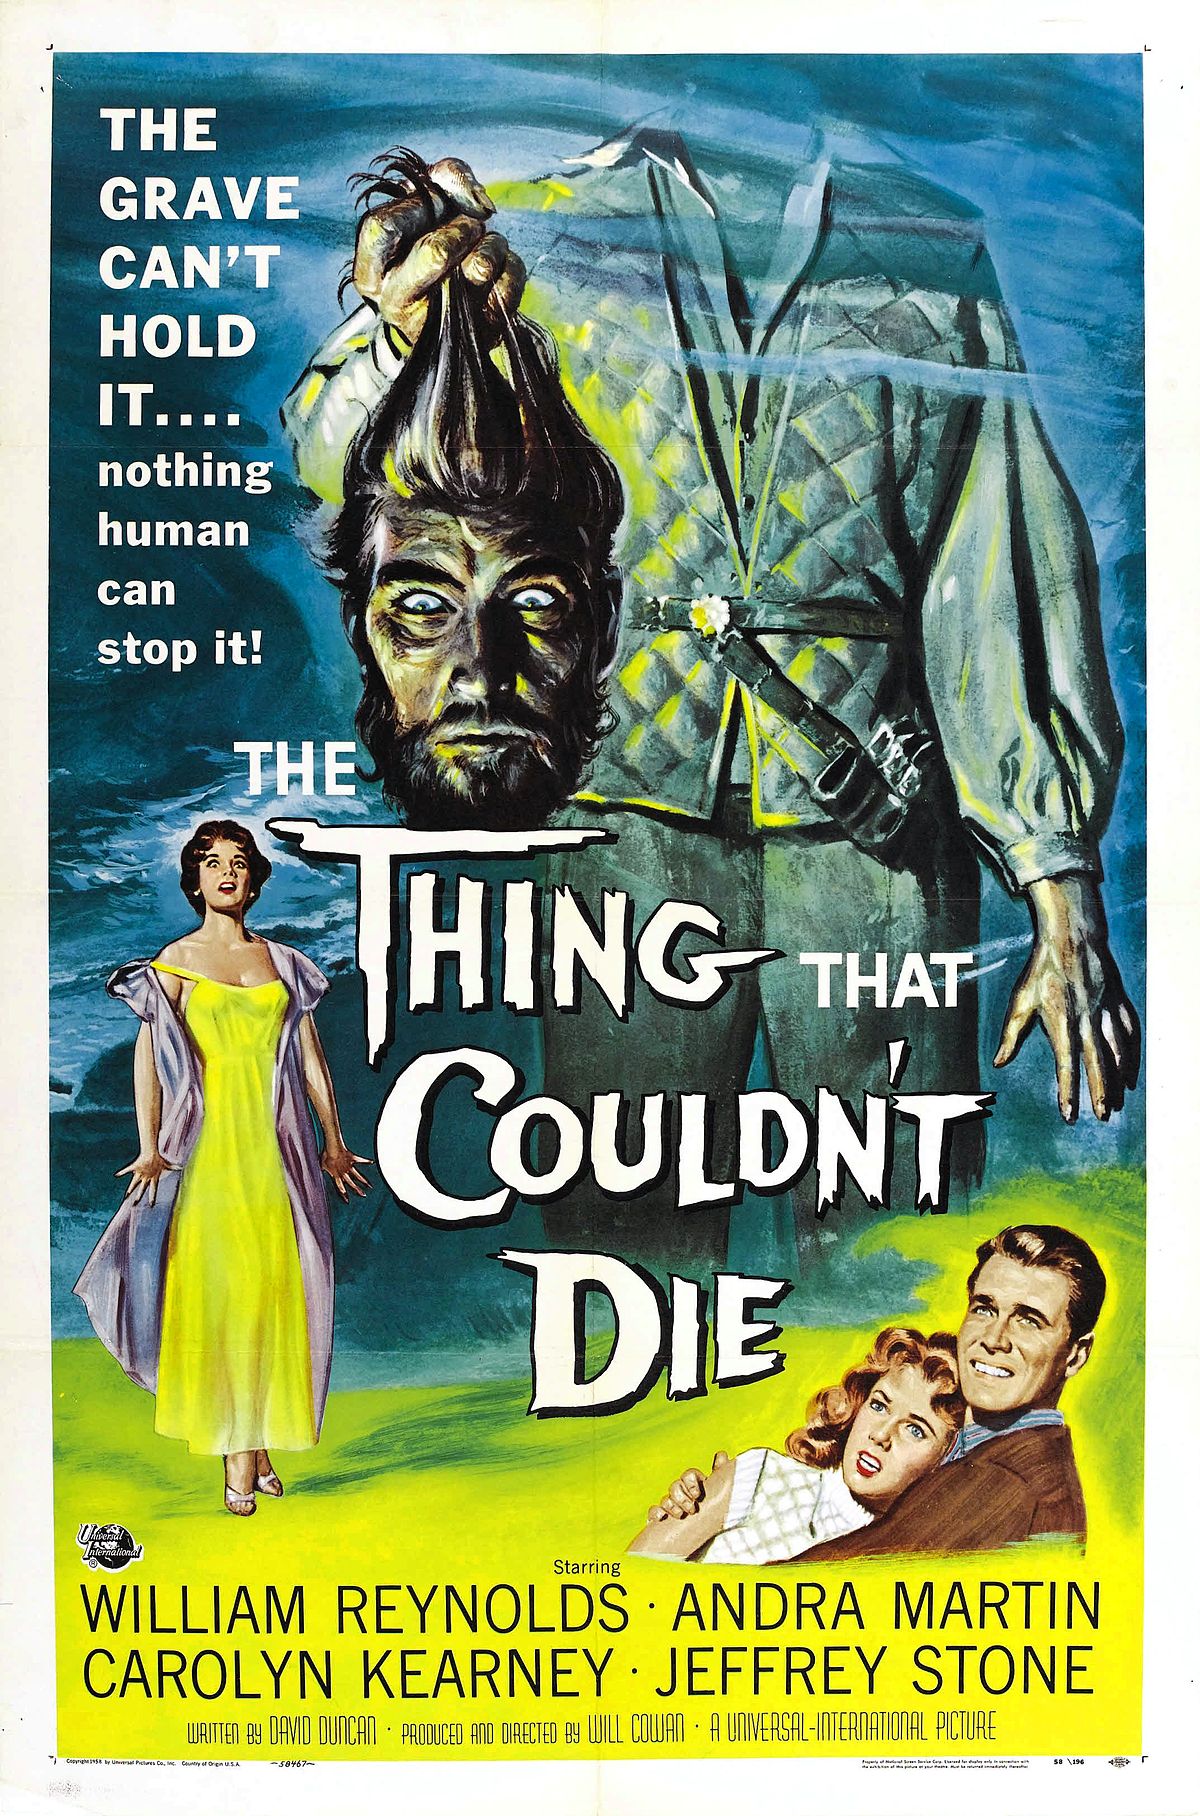 The Thing That Couldn't Die - Wikipedia